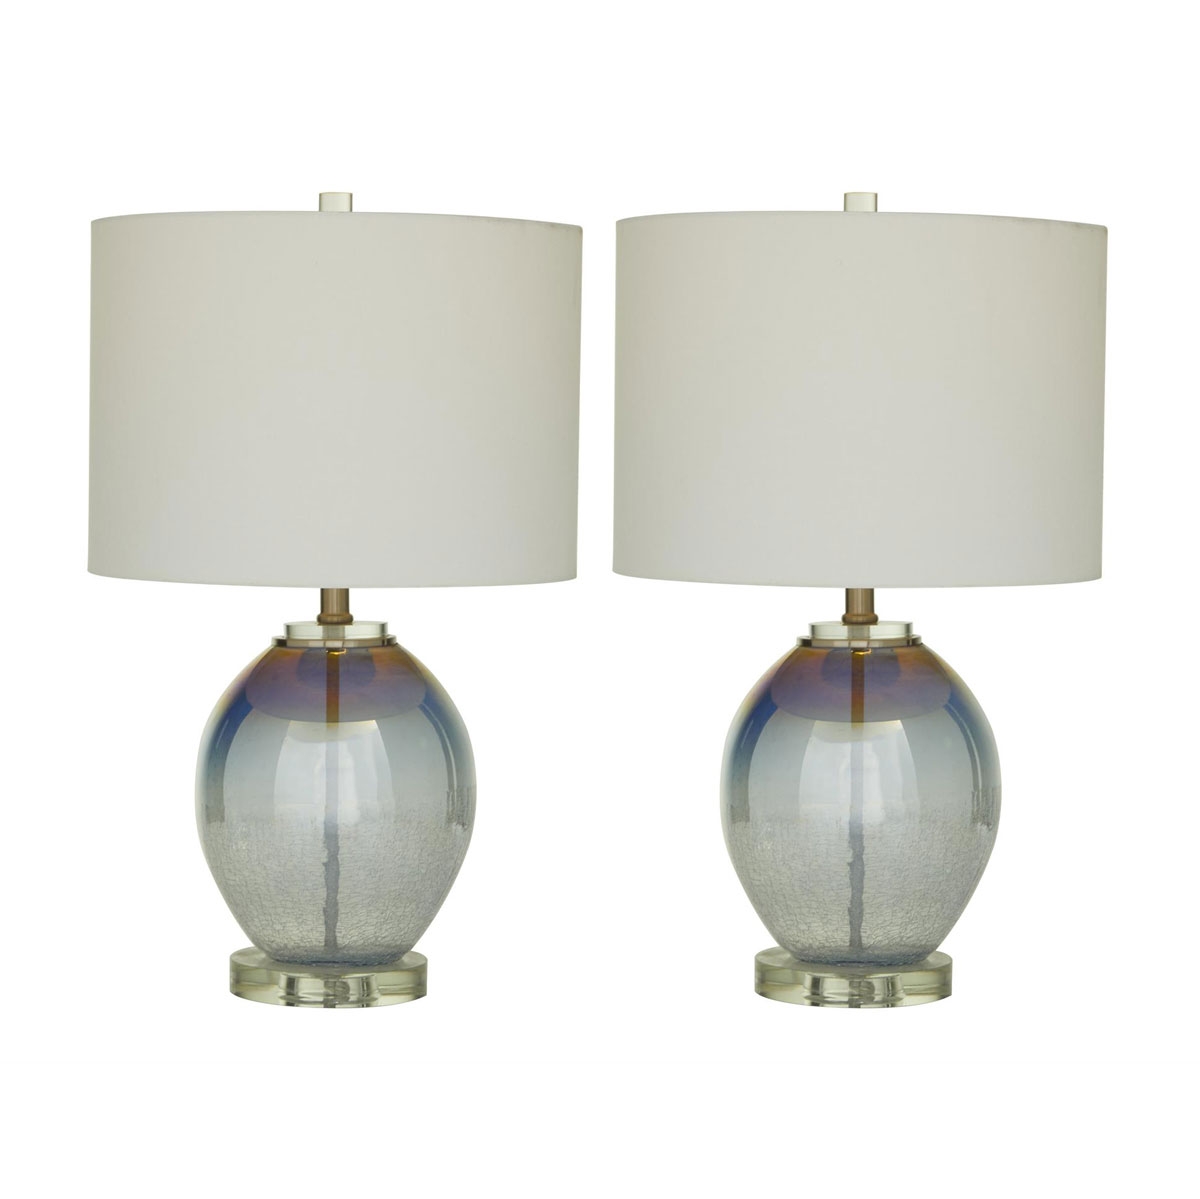 Picture of SET OF 2 BLUE GLASS TABLE LAMPS